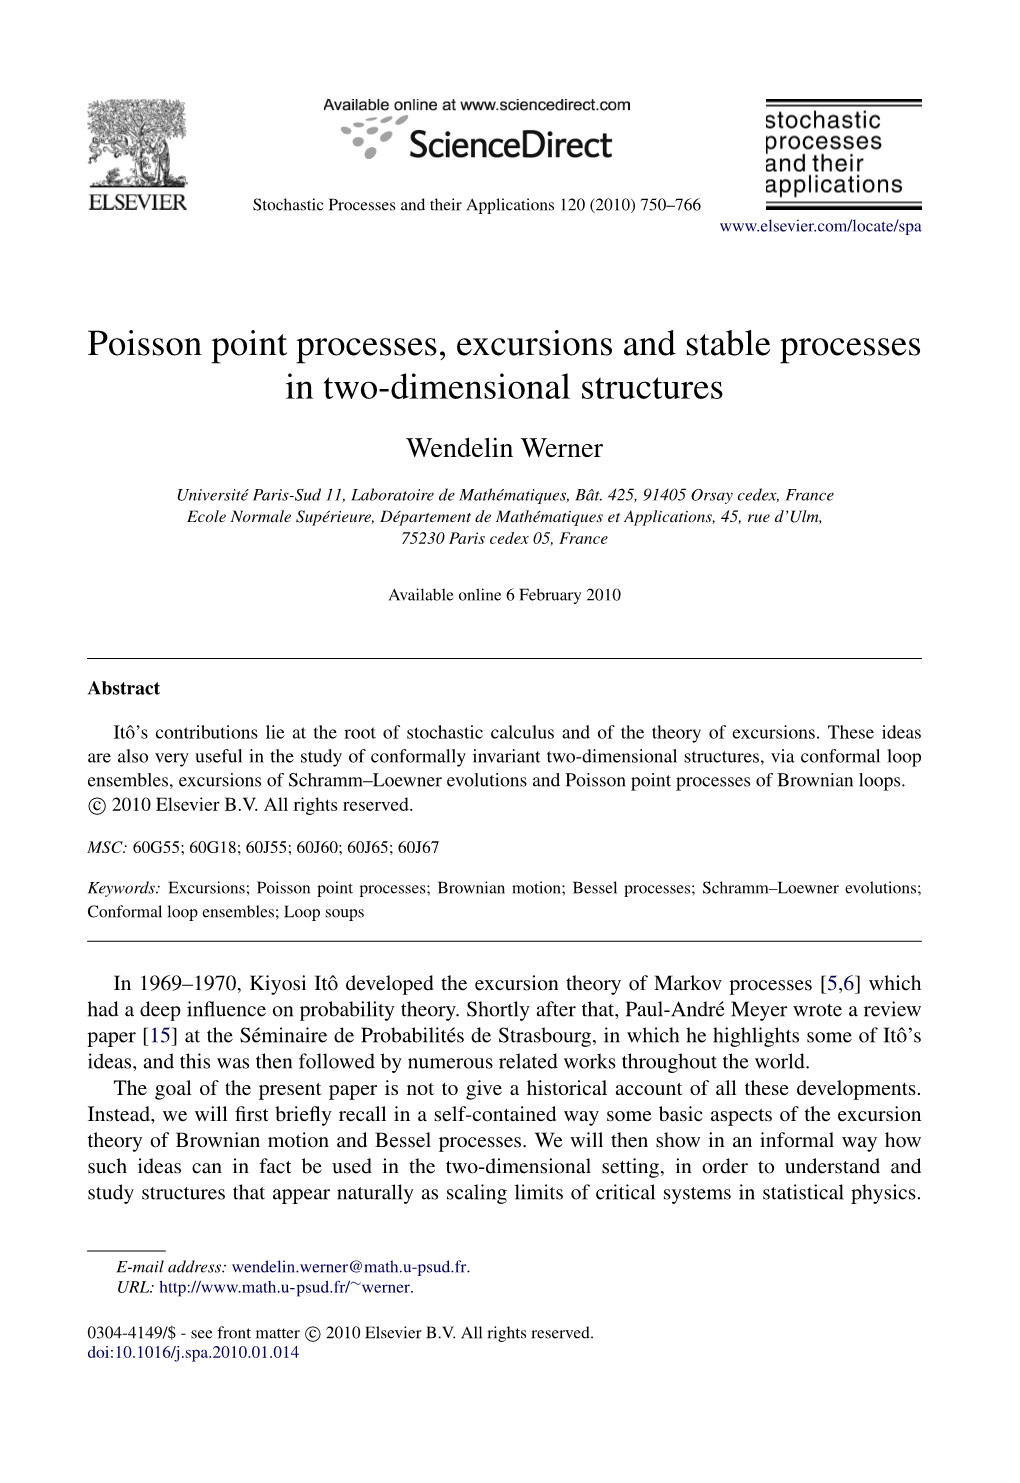 Poisson Point Processes, Excursions and Stable Processes in Two-Dimensional Structures